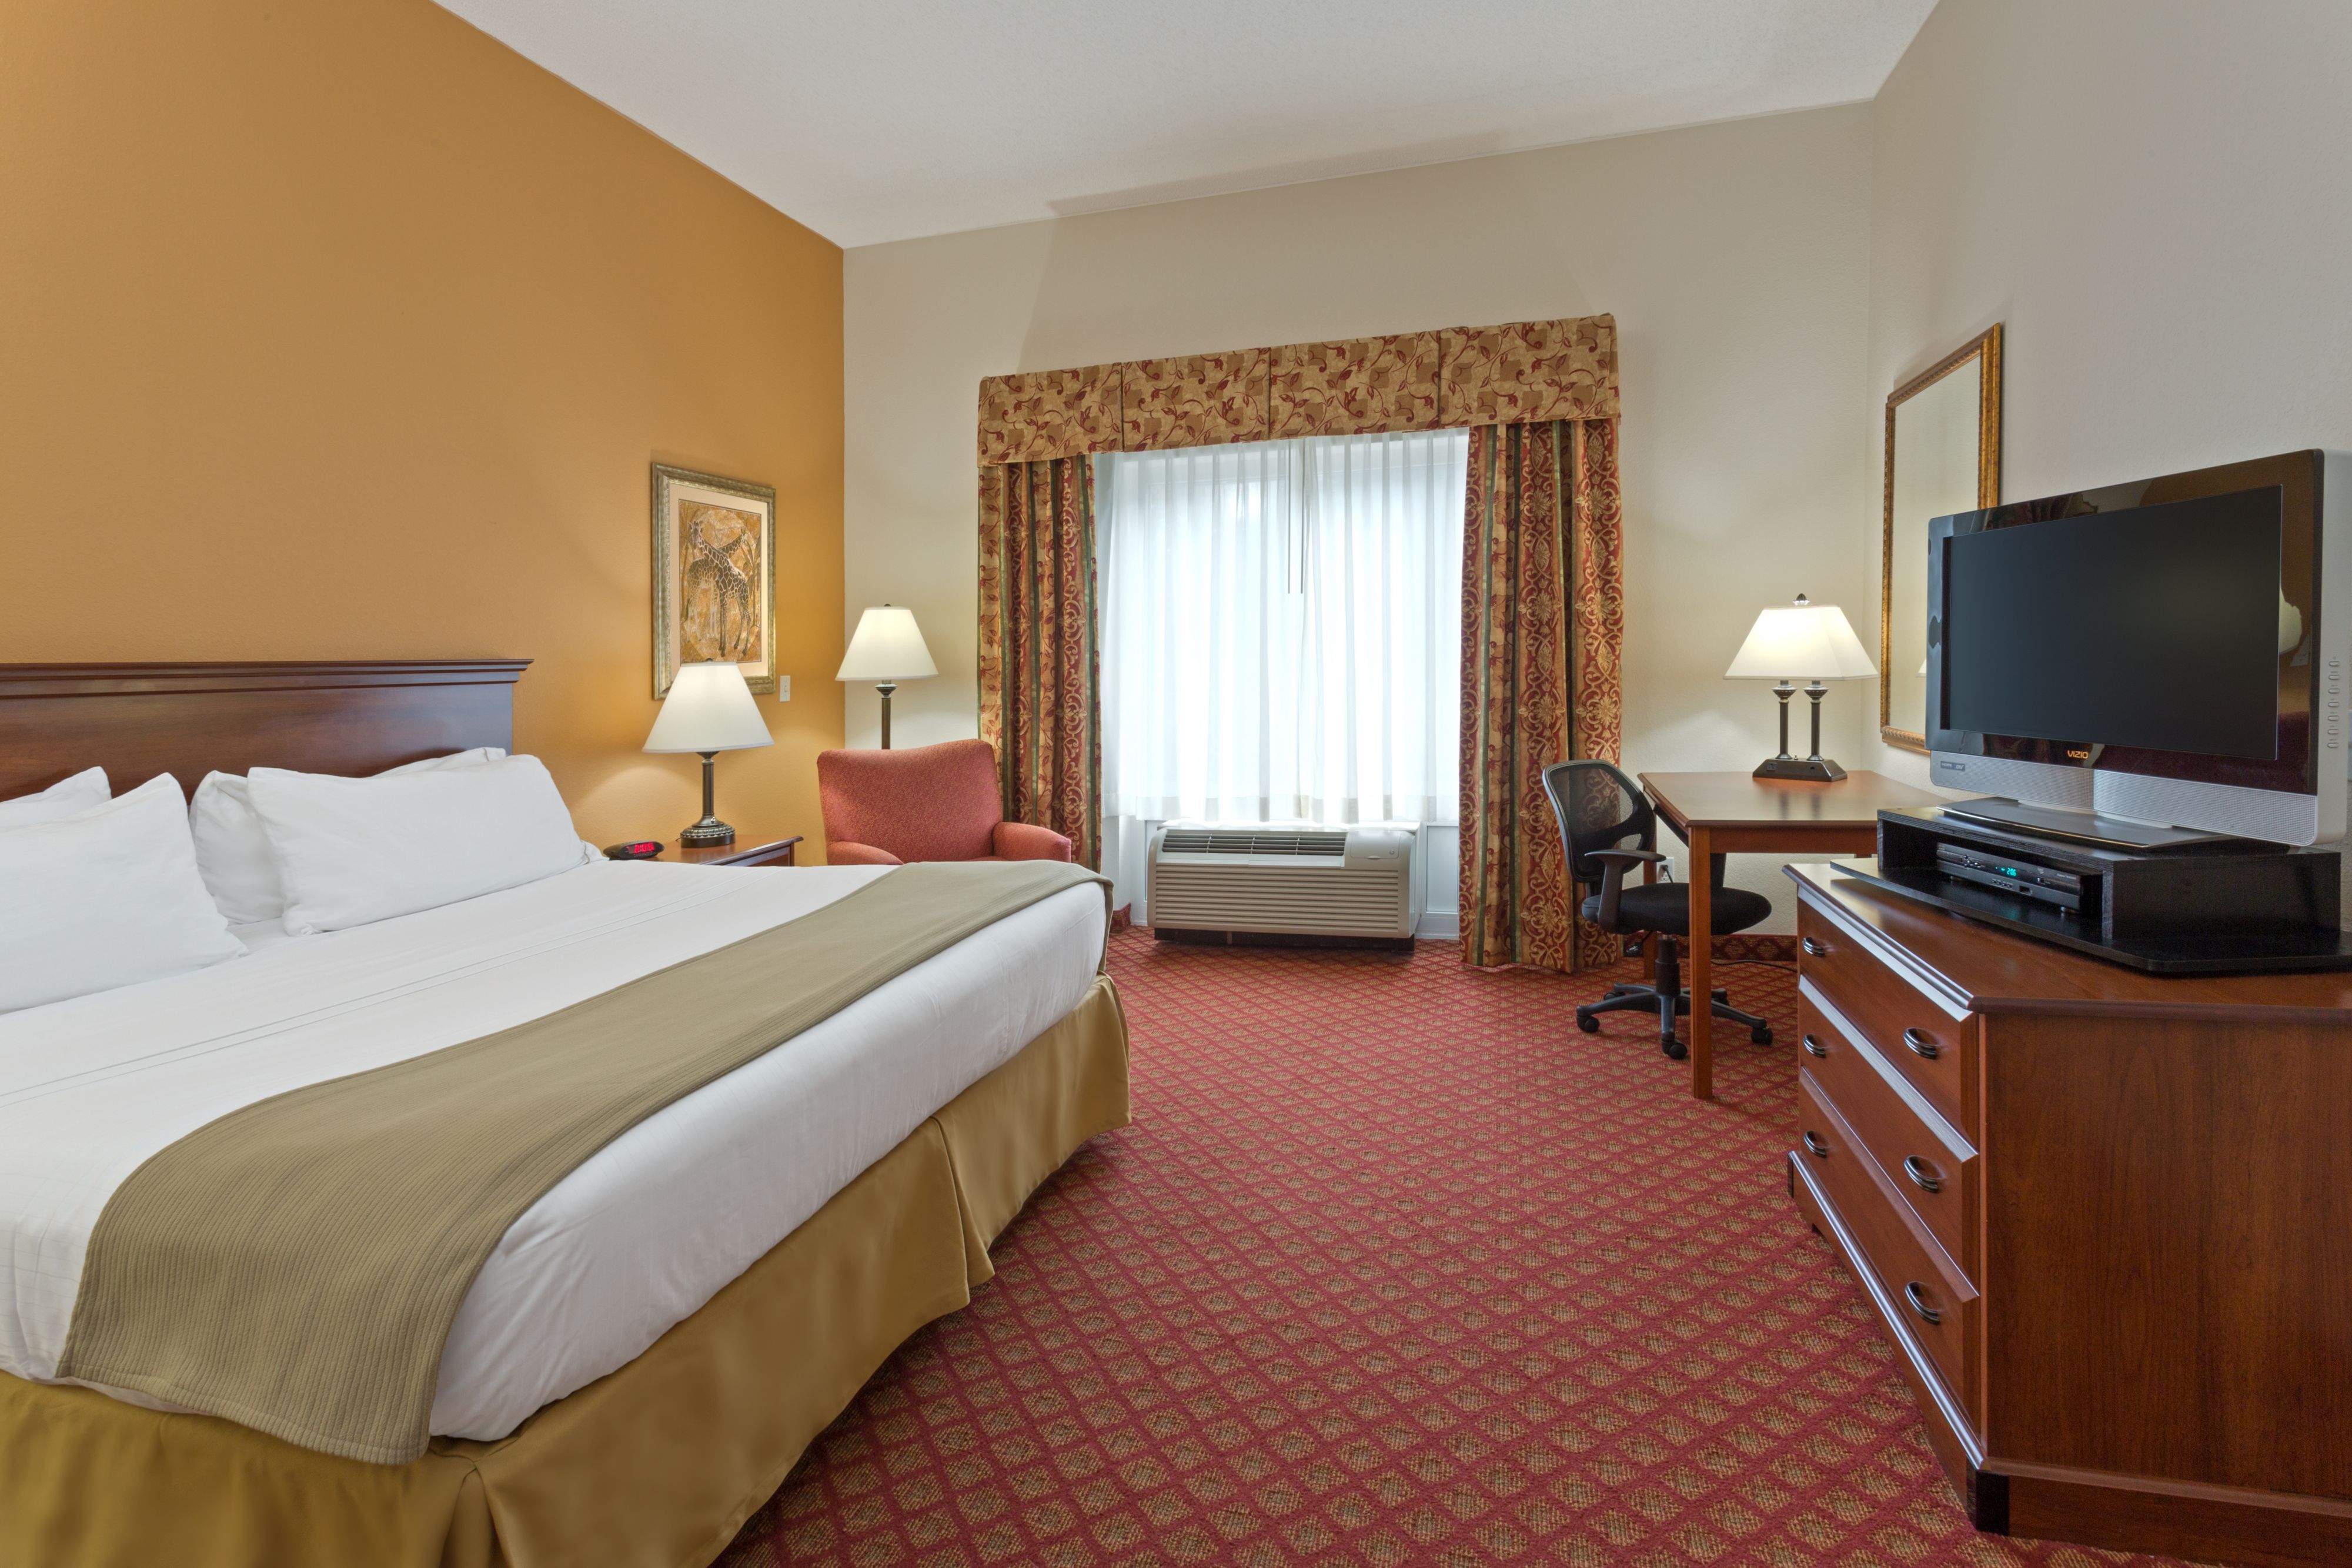 holiday-inn-express-and-suites-silver-springs-3862404390-original.jpg